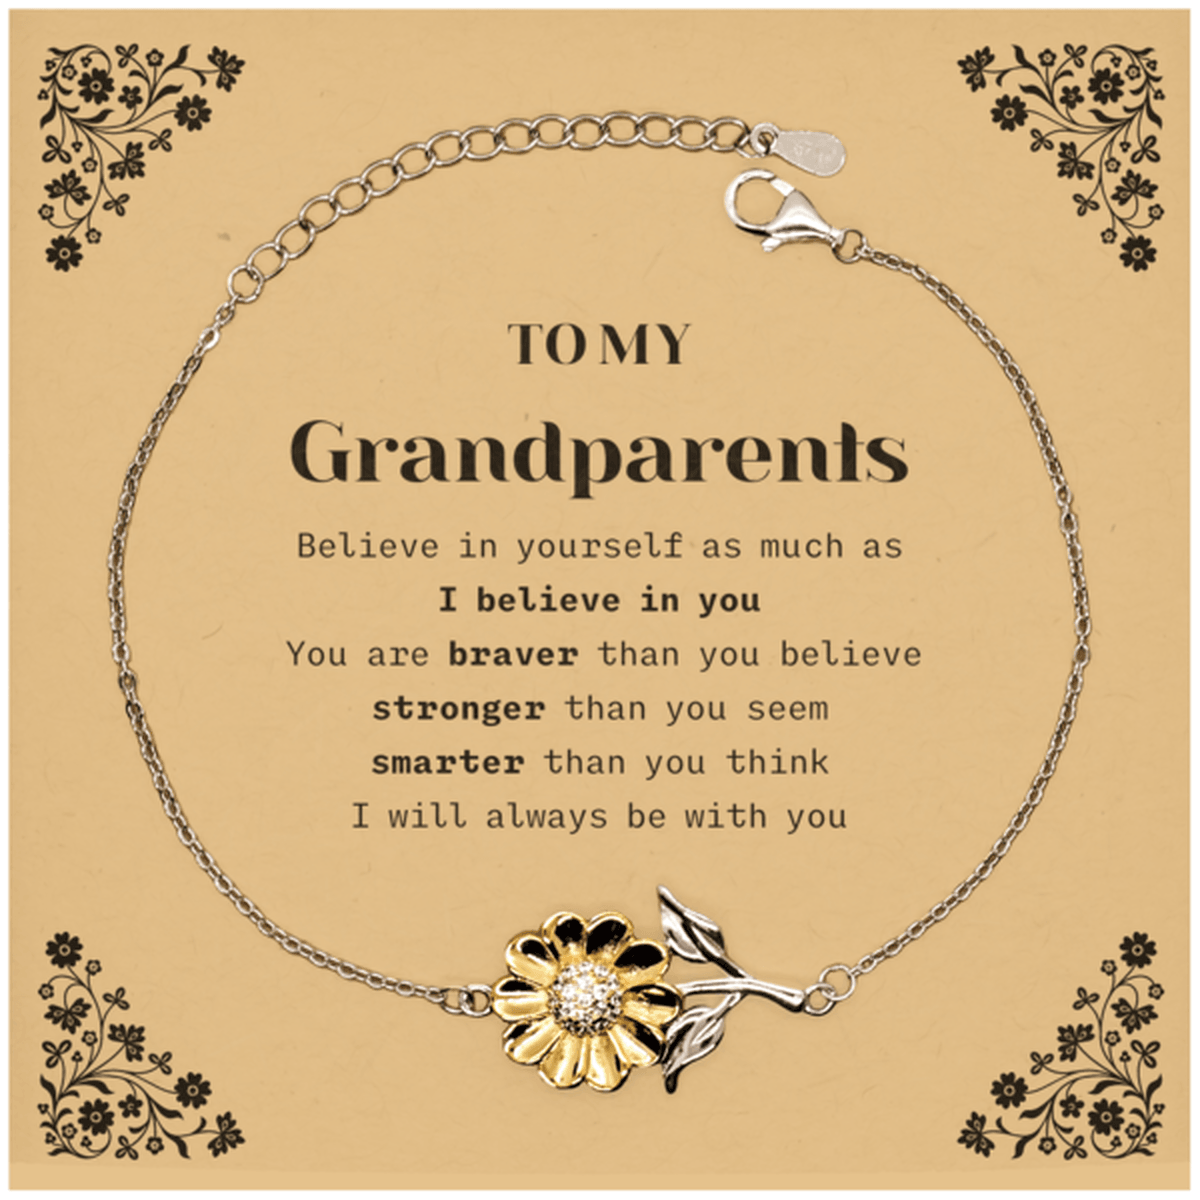 Grandparents Sunflower Bracelet Gifts, To My Grandparents You are braver than you believe, stronger than you seem, Inspirational Gifts For Grandparents Card, Birthday, Christmas Gifts For Grandparents Men Women